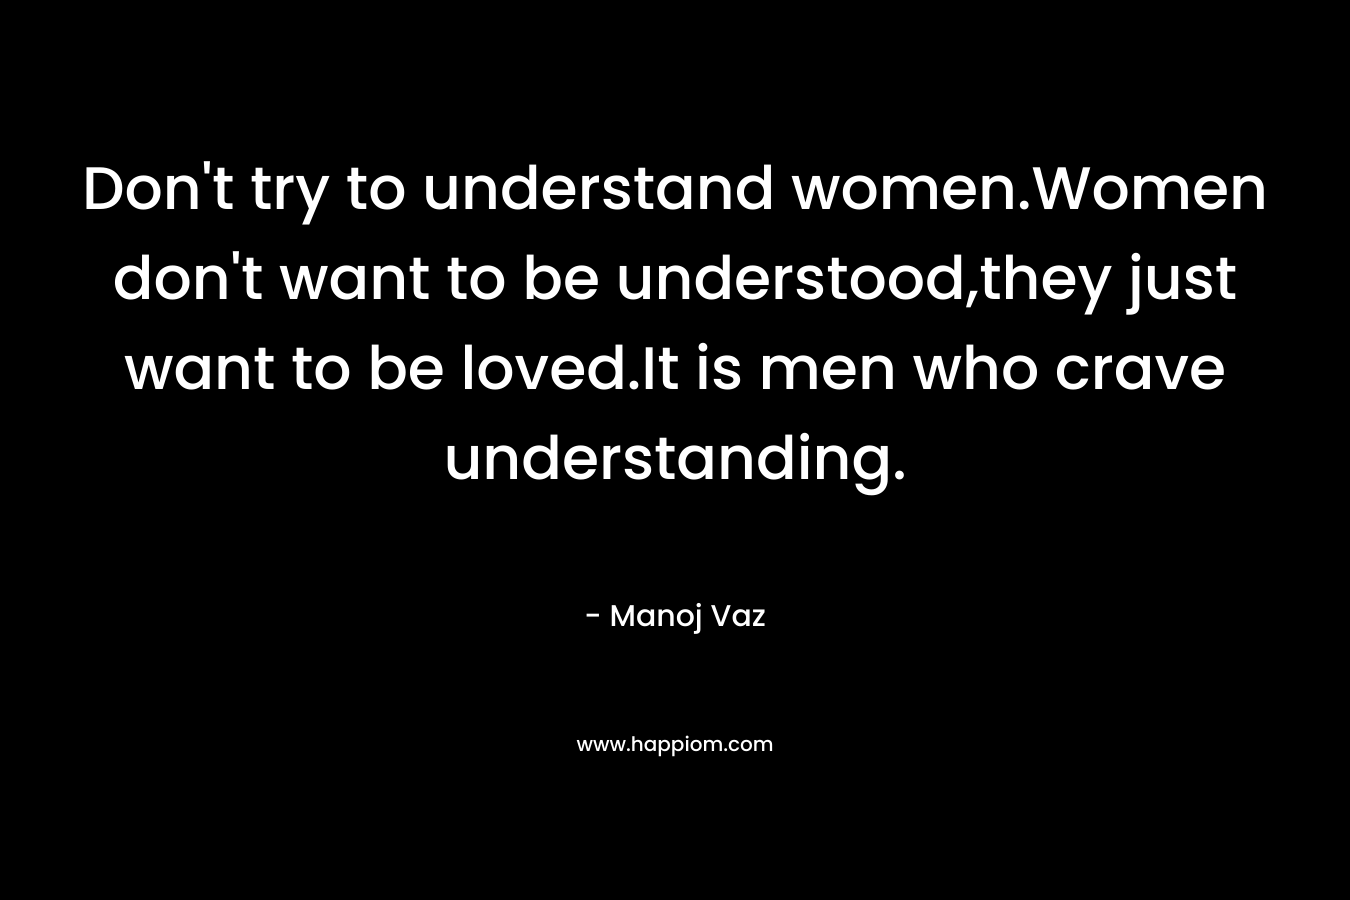 Don't try to understand women.Women don't want to be understood,they just want to be loved.It is men who crave understanding.